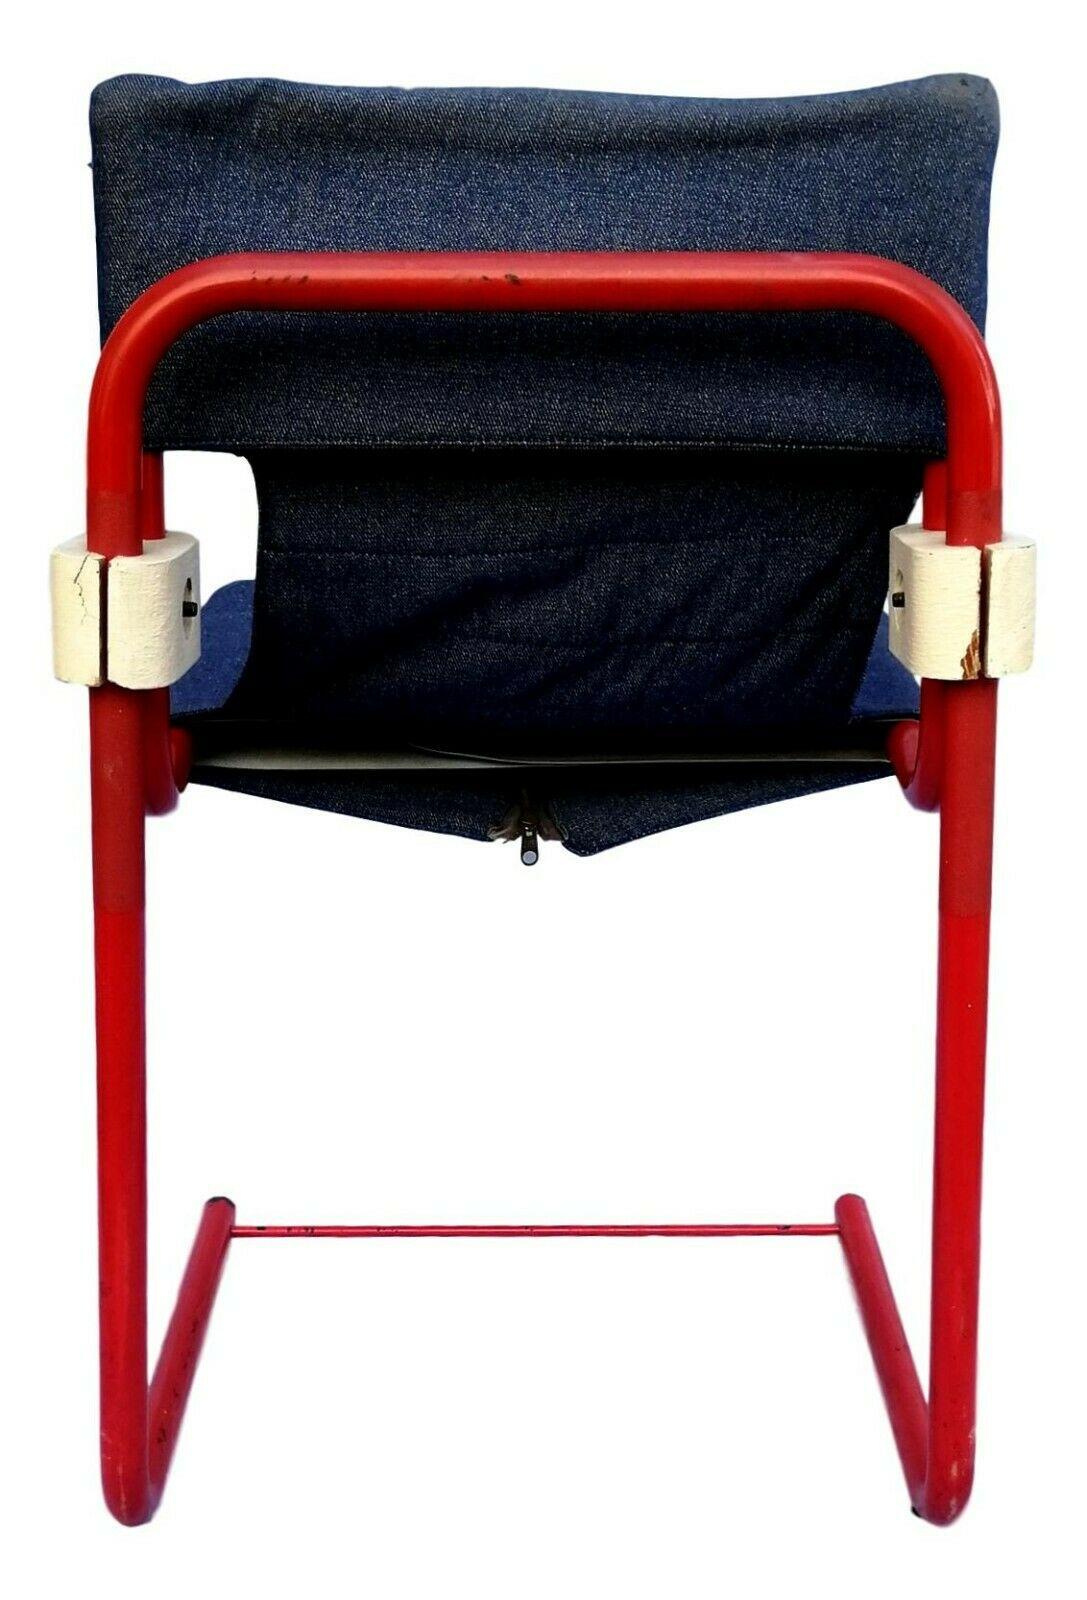 Beautiful cantilever chair of Italian design from the original collection from the 70s, on a red lacquered metal tubular structure and seat covered in jeans

Measures: Total height 77 cm, width 46 cm, depth 56 cm and seat height 48 cm from the